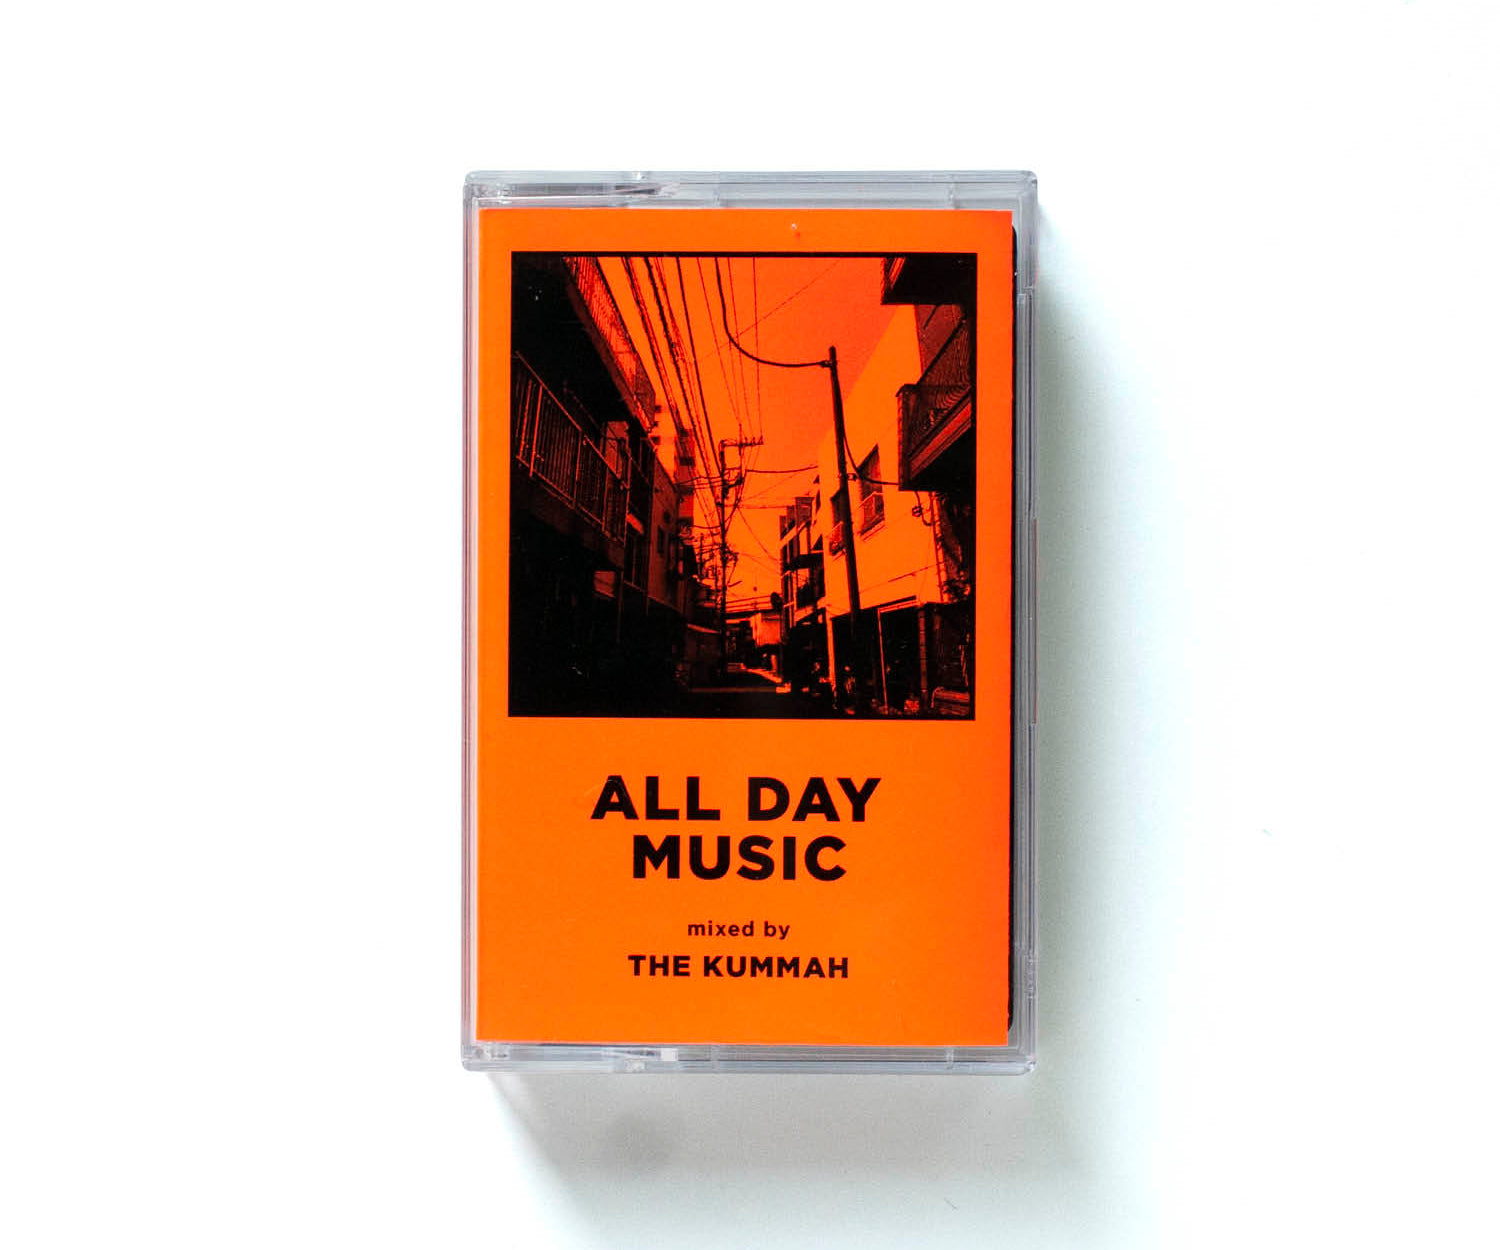 A.D.M. #7 - Mixed by THE KUMMAH | LIKE THIS SHOP